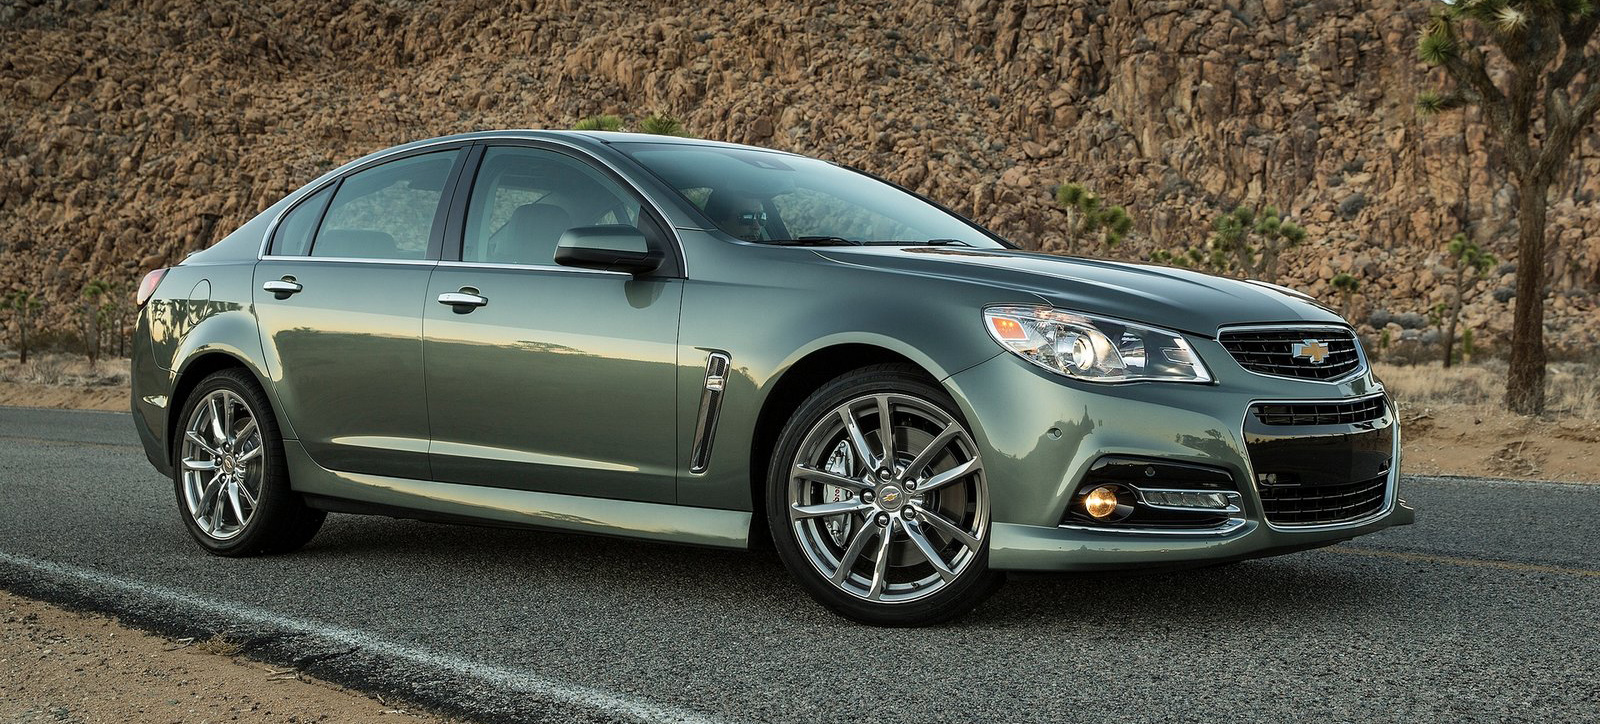 2015 Navy Green Chevrolet SS  picture, mods, upgrades